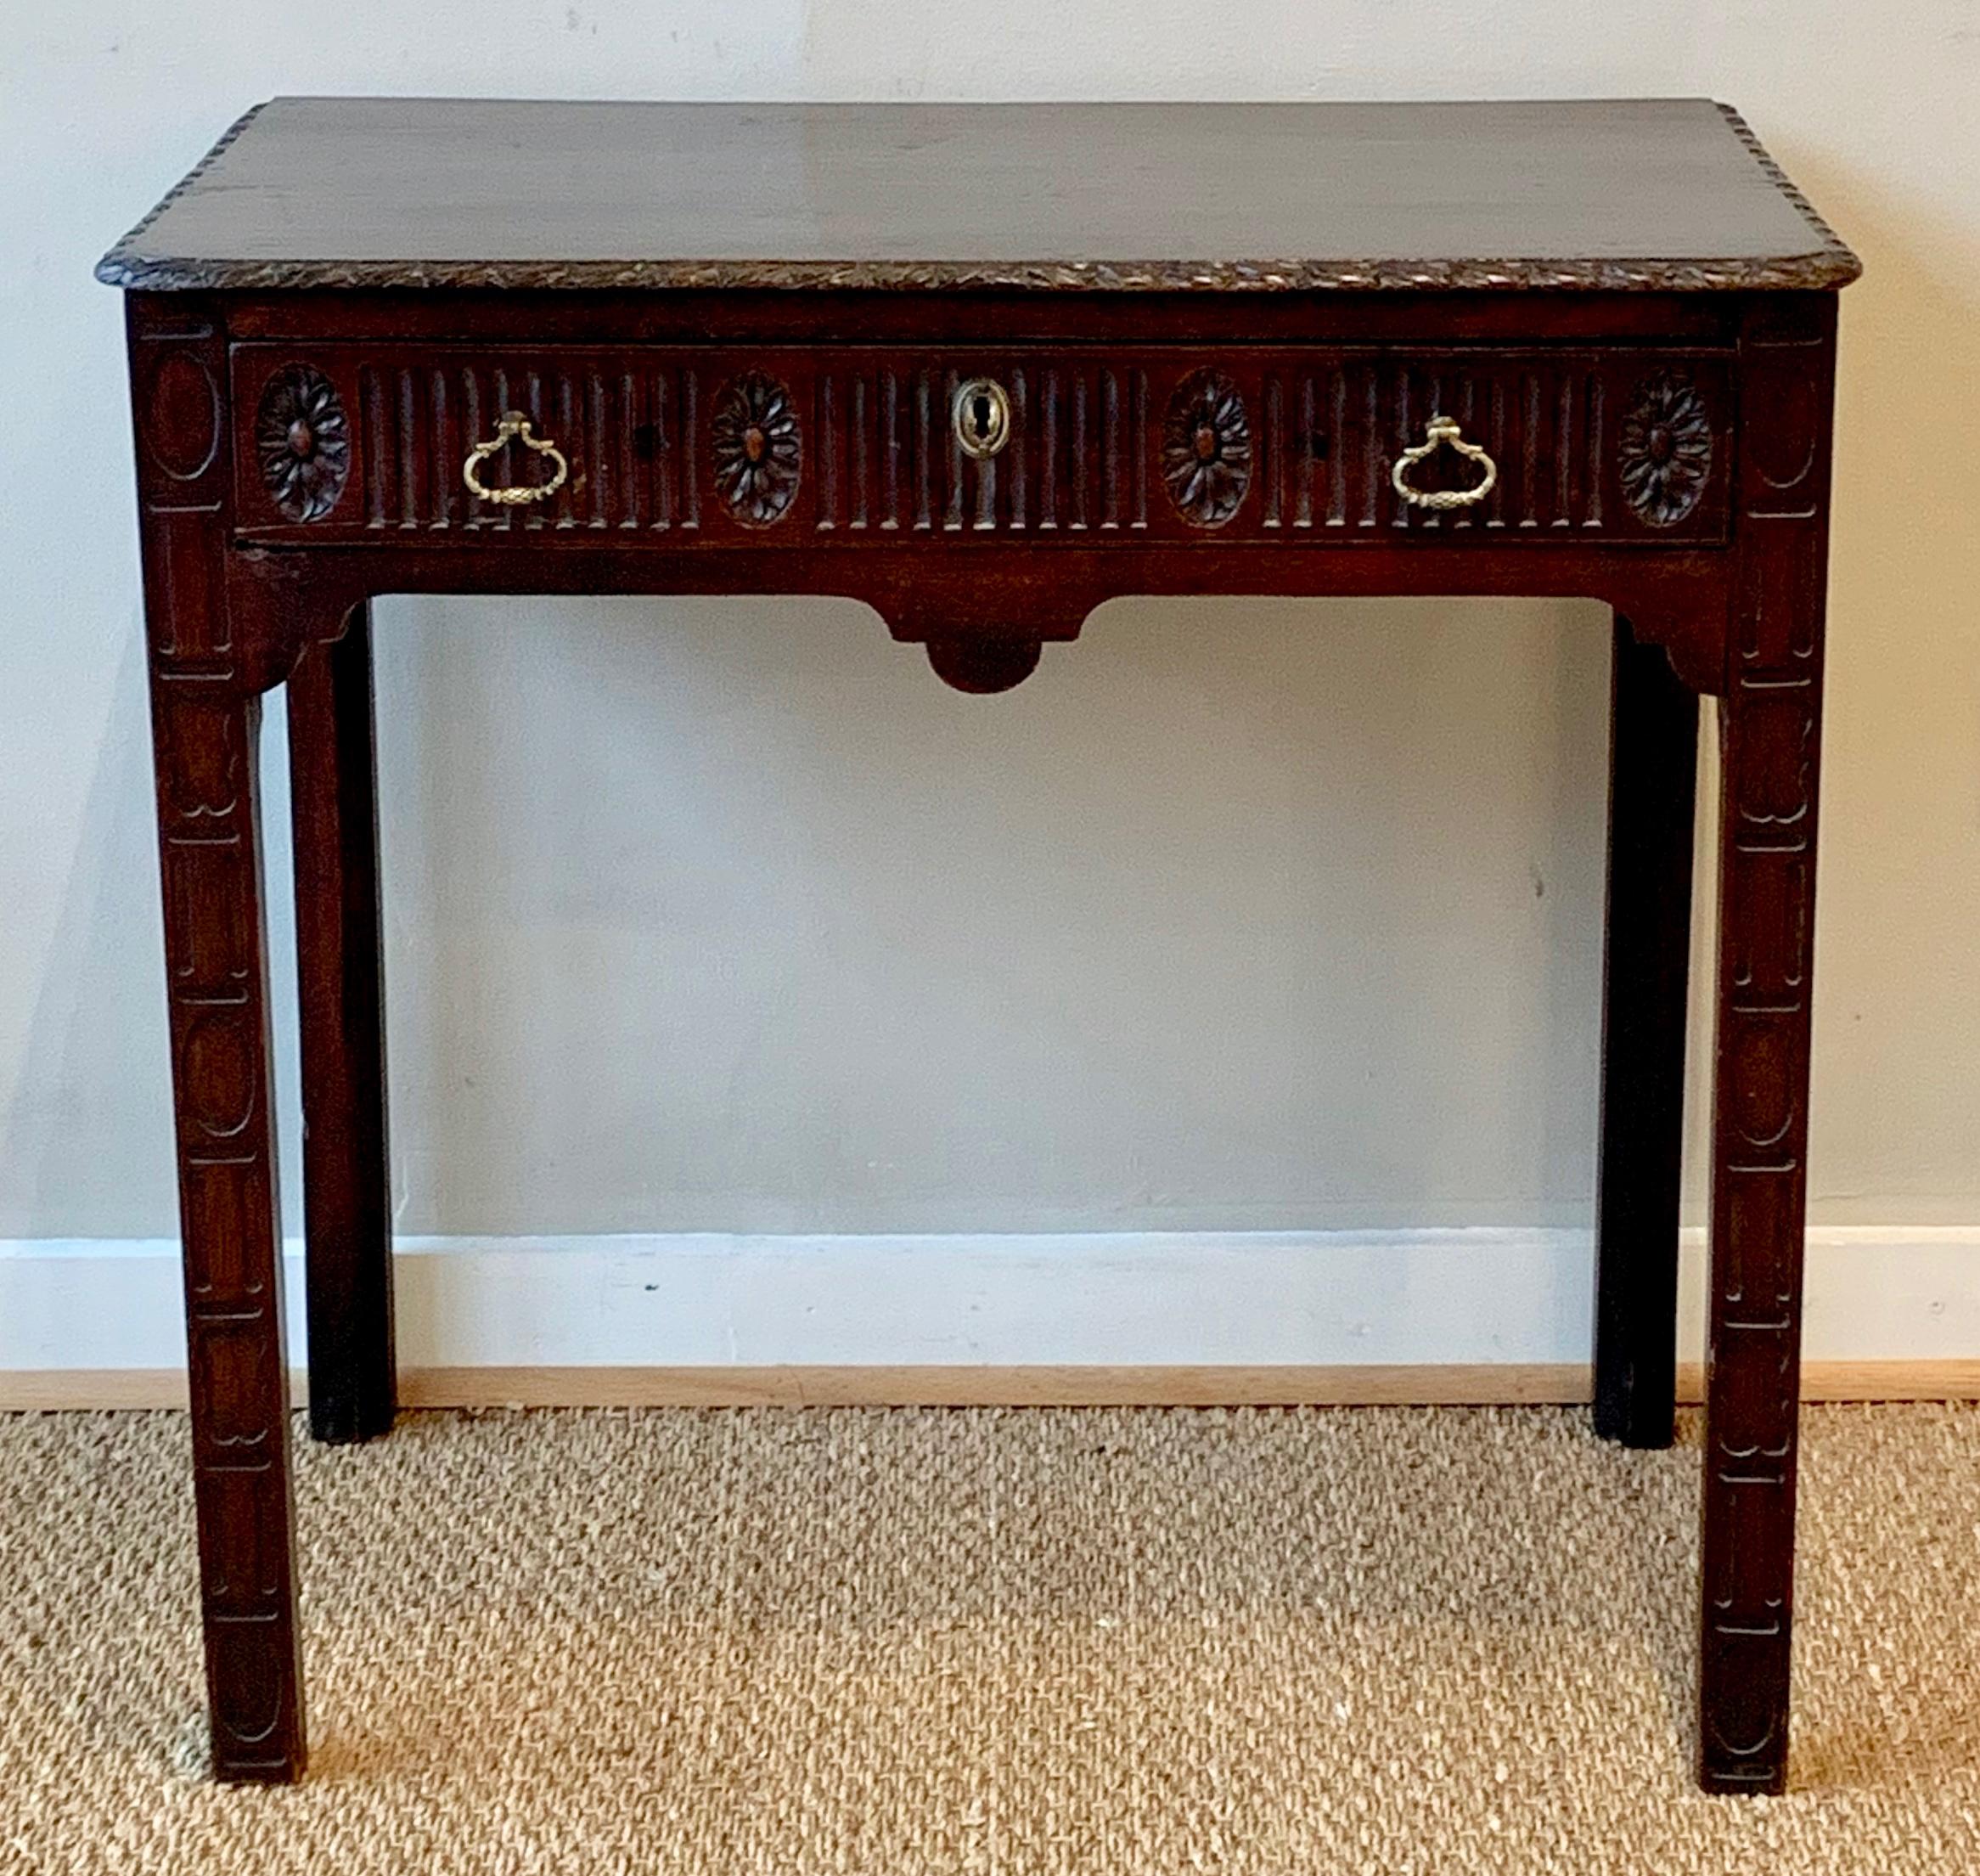 A late 18th century heavily carved mahogany single drawer console or side table with original brass pulls.